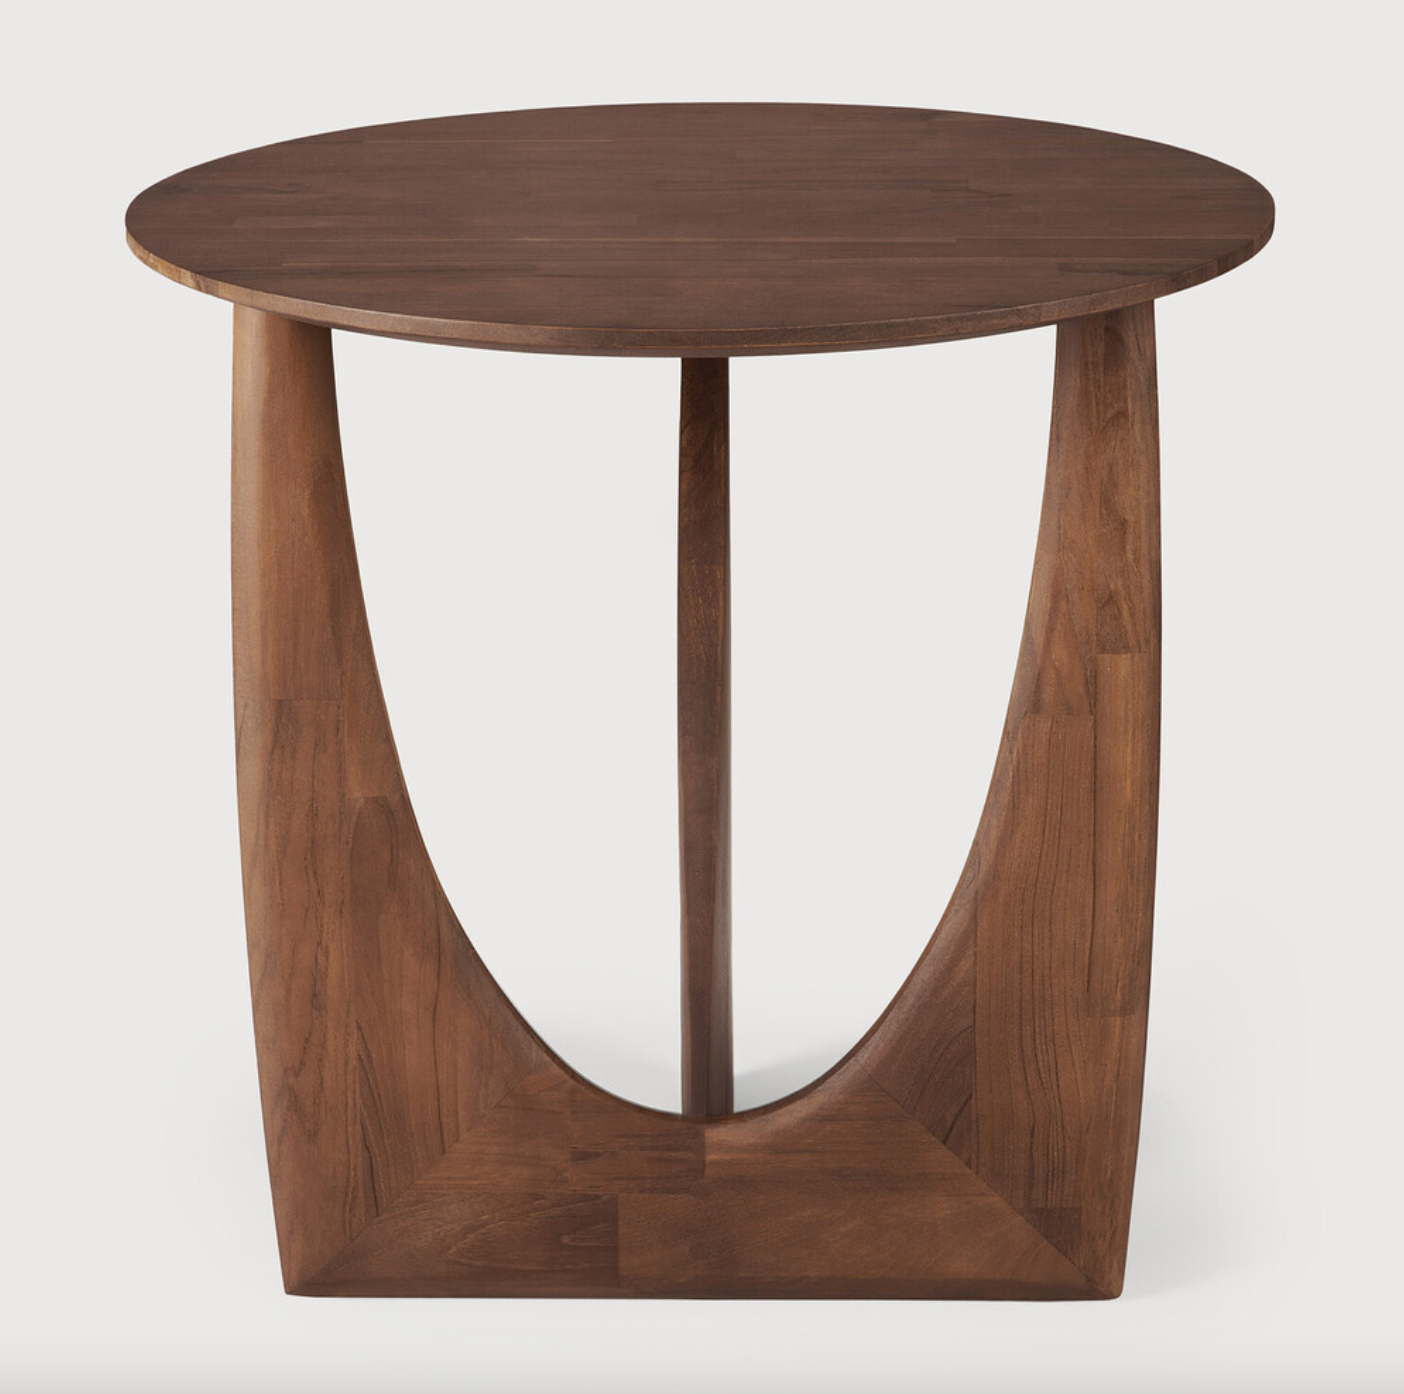 From any angle, the Teak Geometric Side Table does not only look different, it also becomes different. We love seeing this table as a sculptural accent to your living space or office.  Designed by Alain van Havre  Dimensions: 20.5"w x 20.5"d x 20"h  Weight: 11 lbs  Material: Teak Finish: Varnished